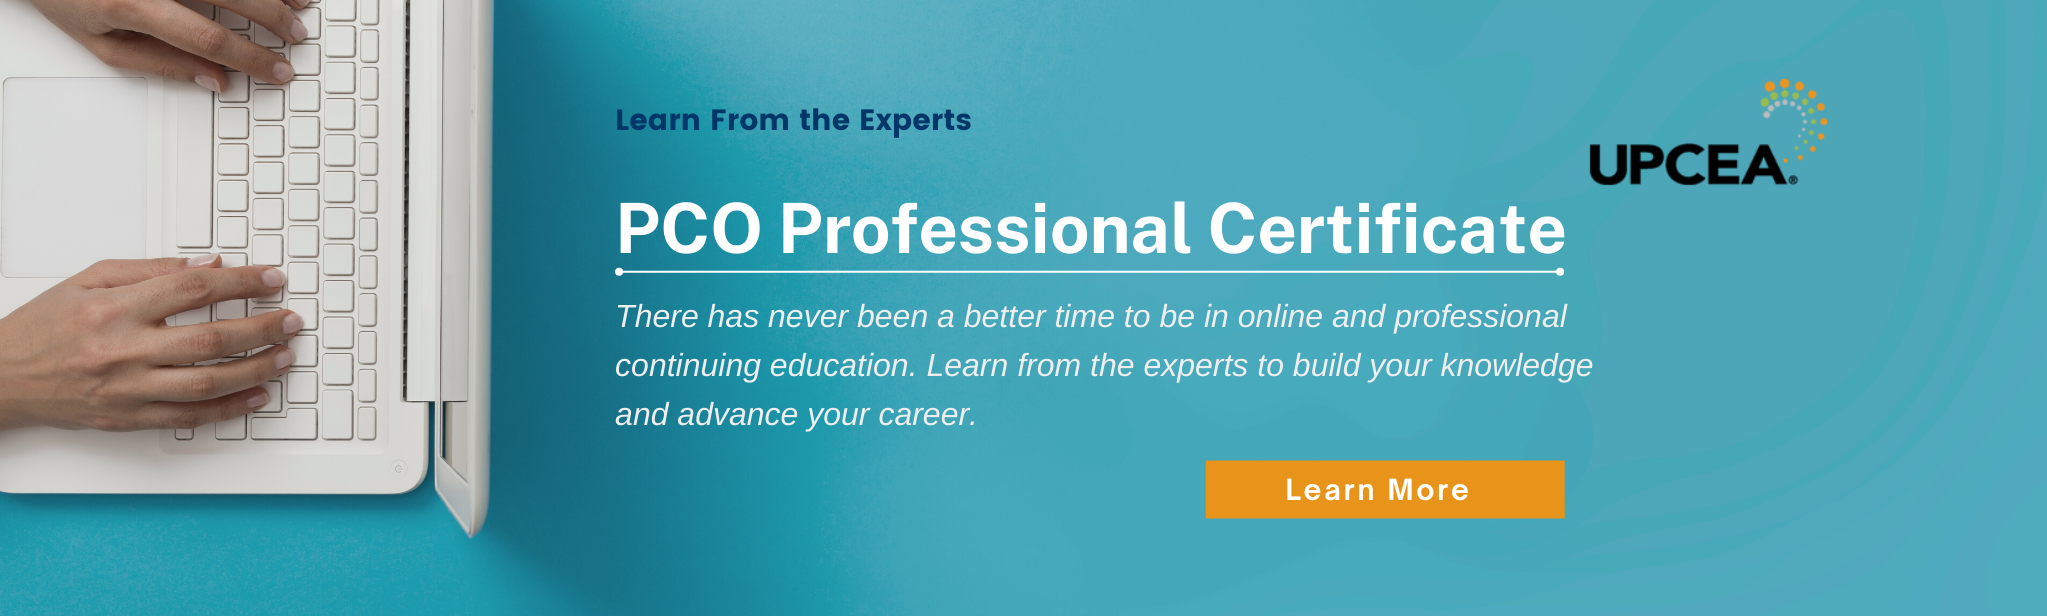 PCO Professional Certificate - Learn from the Experts - There has never been a better time to be in online and professional continuing education. Learn more